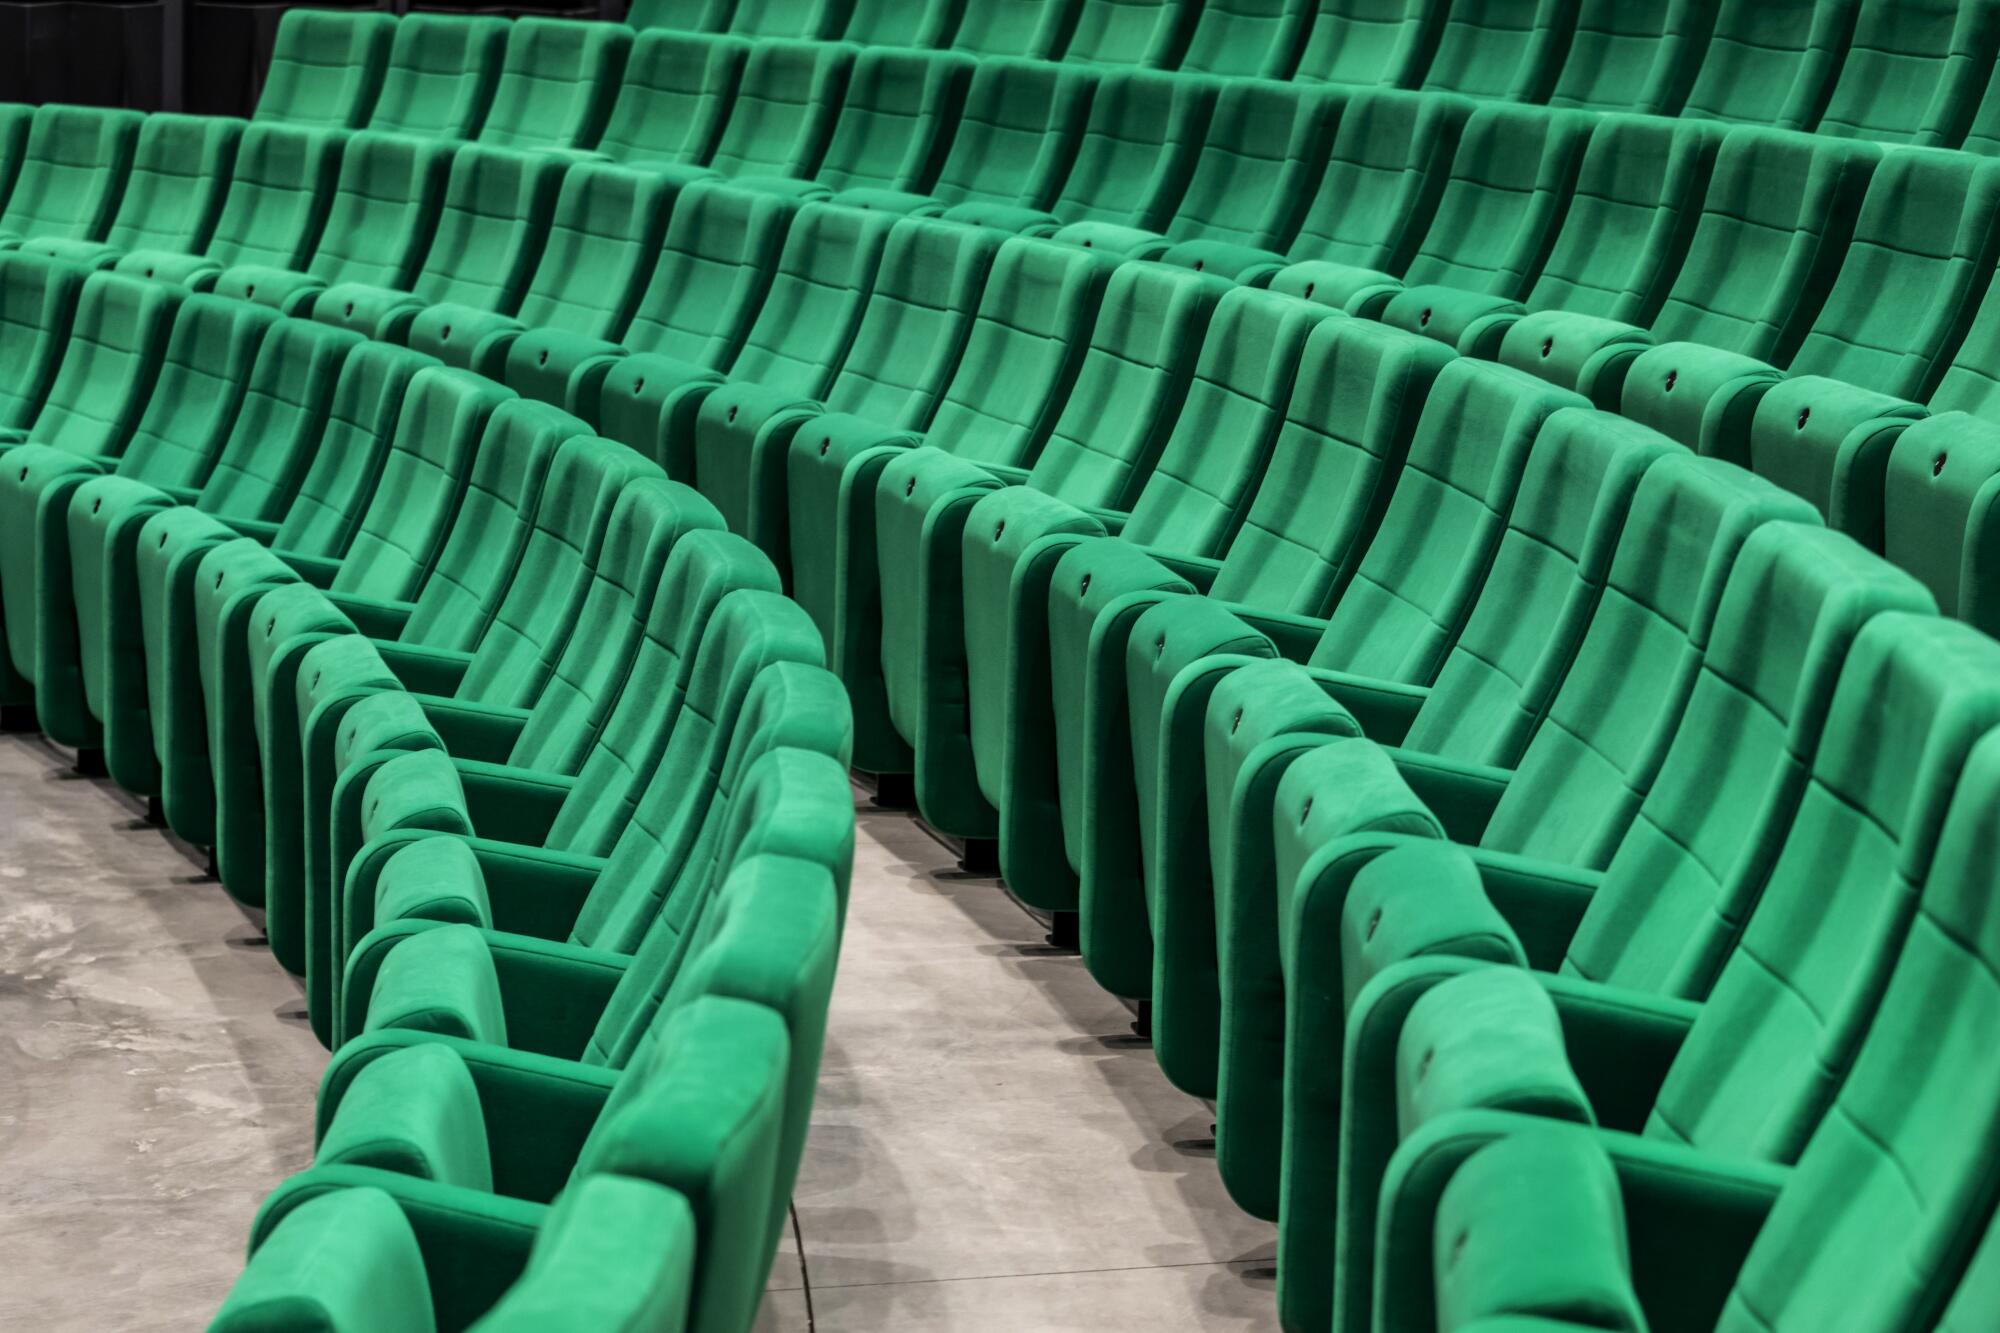 A view of the rows of green seats in the Academy Museum's Ted Mann Theater